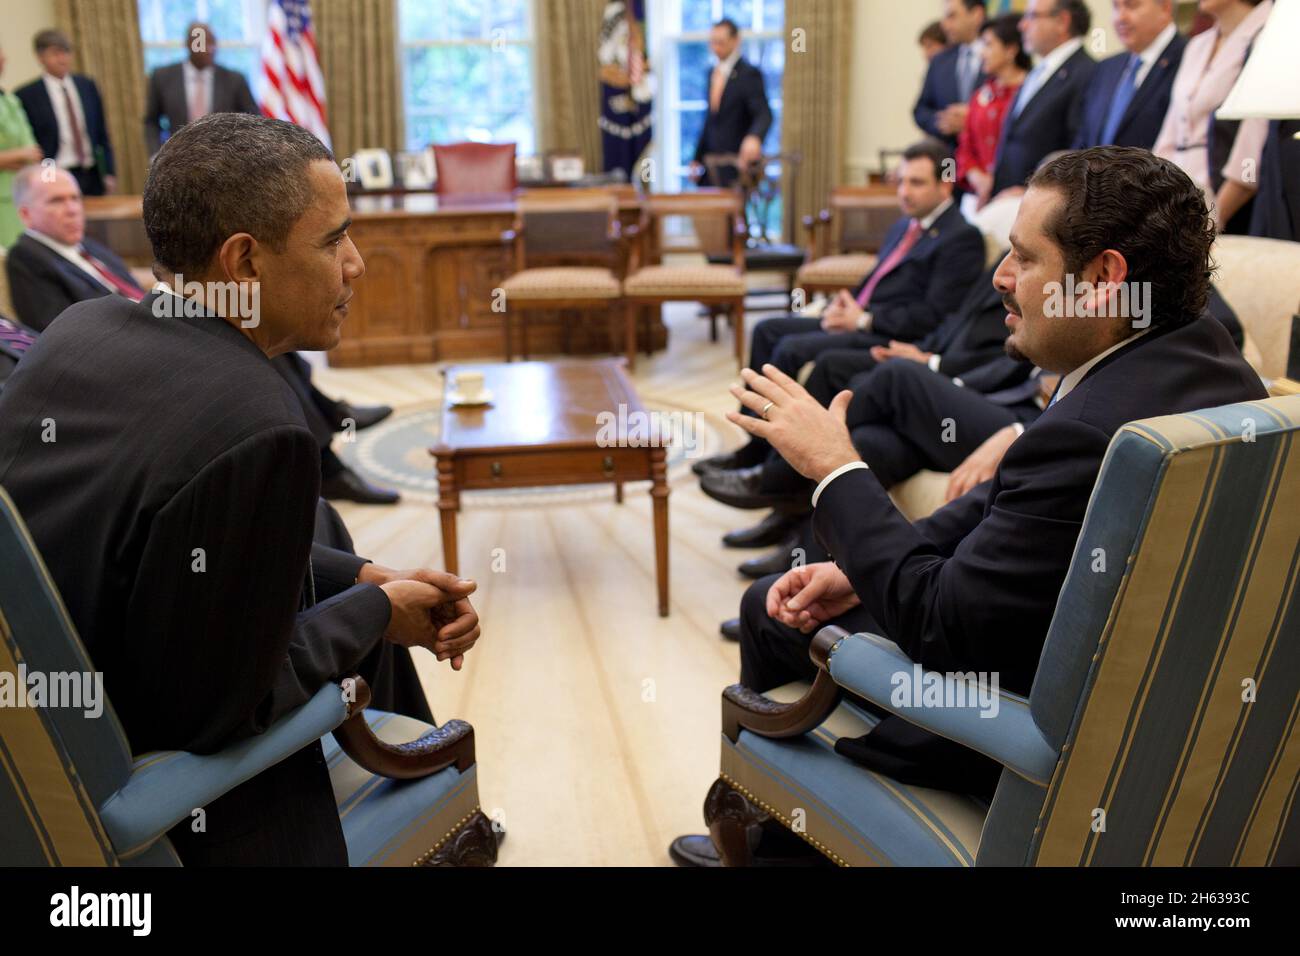 President Barack Obama meets with Prime Minister Saad Hariri of Lebanon in the Oval Office, May 24, 2010. Stock Photo